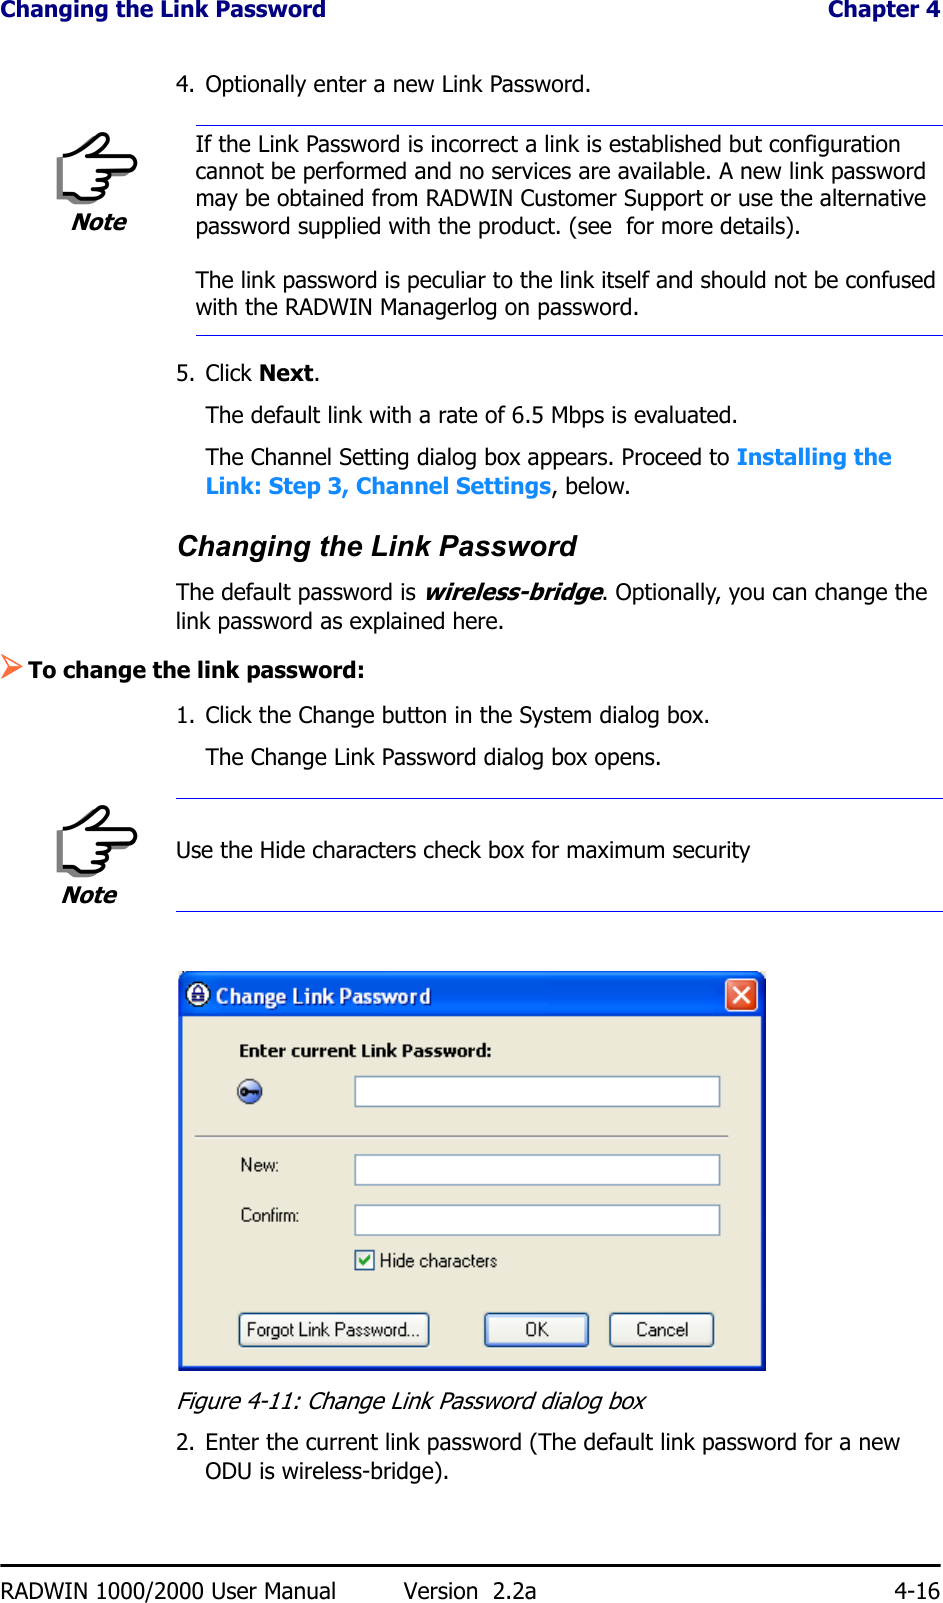 Changing the Link Password  Chapter 4RADWIN 1000/2000 User Manual Version  2.2a 4-164. Optionally enter a new Link Password. 5. Click Next.The default link with a rate of 6.5 Mbps is evaluated.The Channel Setting dialog box appears. Proceed to Installing the Link: Step 3, Channel Settings, below.Changing the Link PasswordThe default password is wireless-bridge. Optionally, you can change the link password as explained here.¾To change the link password:1. Click the Change button in the System dialog box.The Change Link Password dialog box opens.Figure 4-11: Change Link Password dialog box2. Enter the current link password (The default link password for a new ODU is wireless-bridge).NoteIf the Link Password is incorrect a link is established but configuration cannot be performed and no services are available. A new link password may be obtained from RADWIN Customer Support or use the alternative password supplied with the product. (see  for more details).The link password is peculiar to the link itself and should not be confused with the RADWIN Managerlog on password.NoteUse the Hide characters check box for maximum security